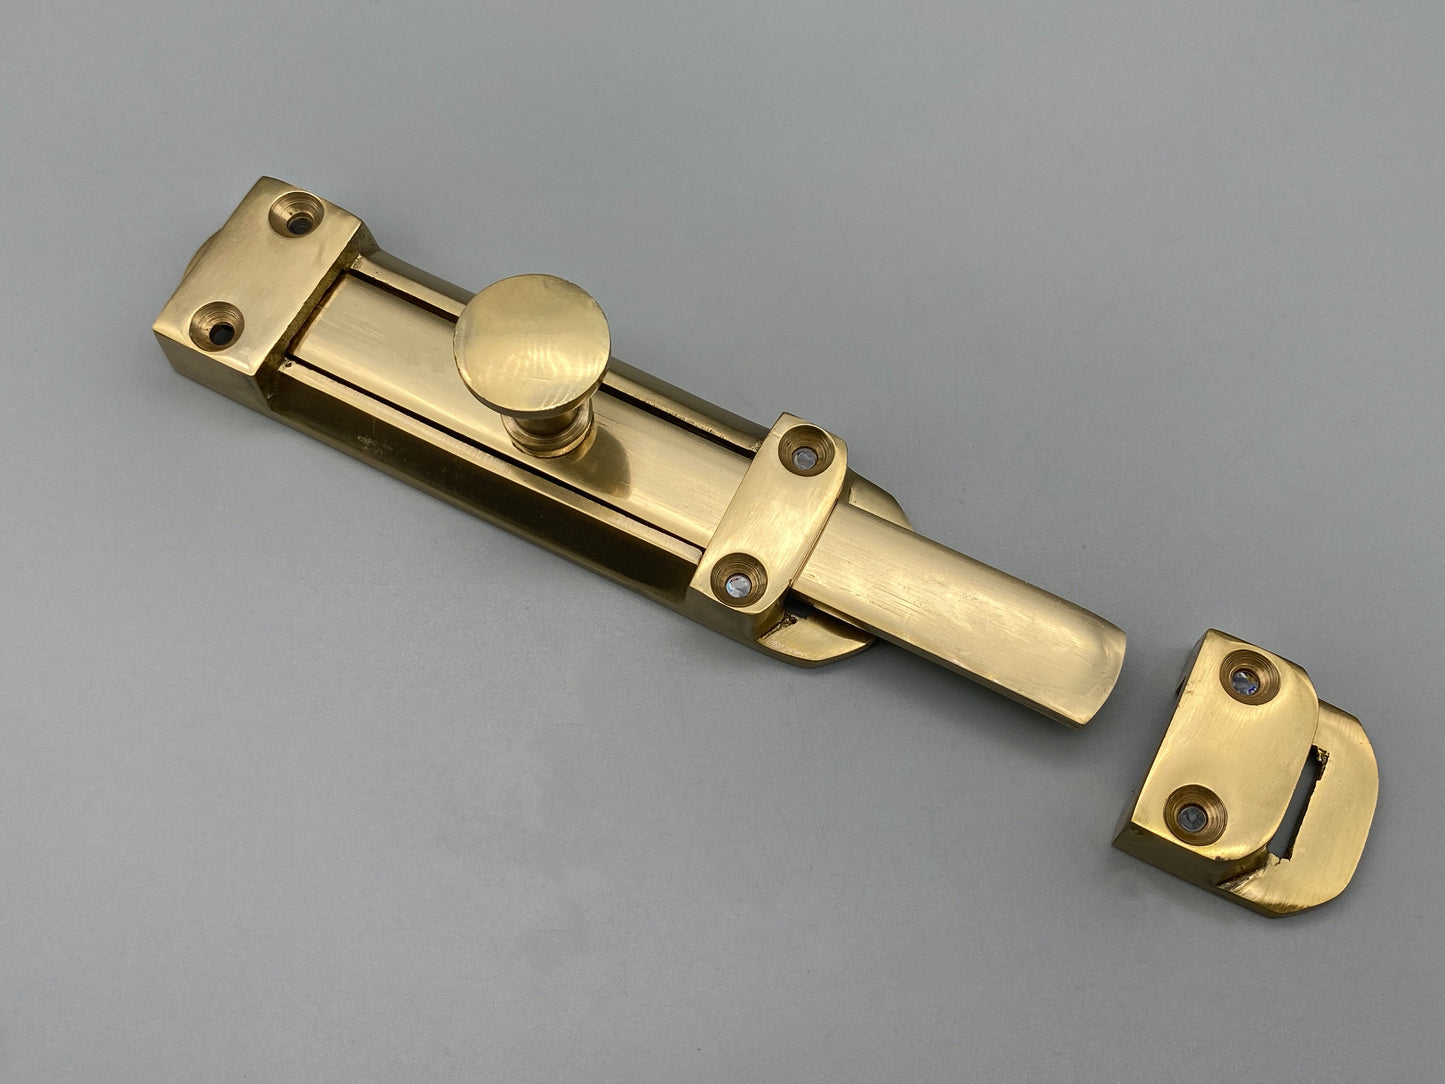 Solid Brass Tower Bolt - Various Sizes 100mm (4"inch) - 150mm (6" inch) - 200mm (8" inch)